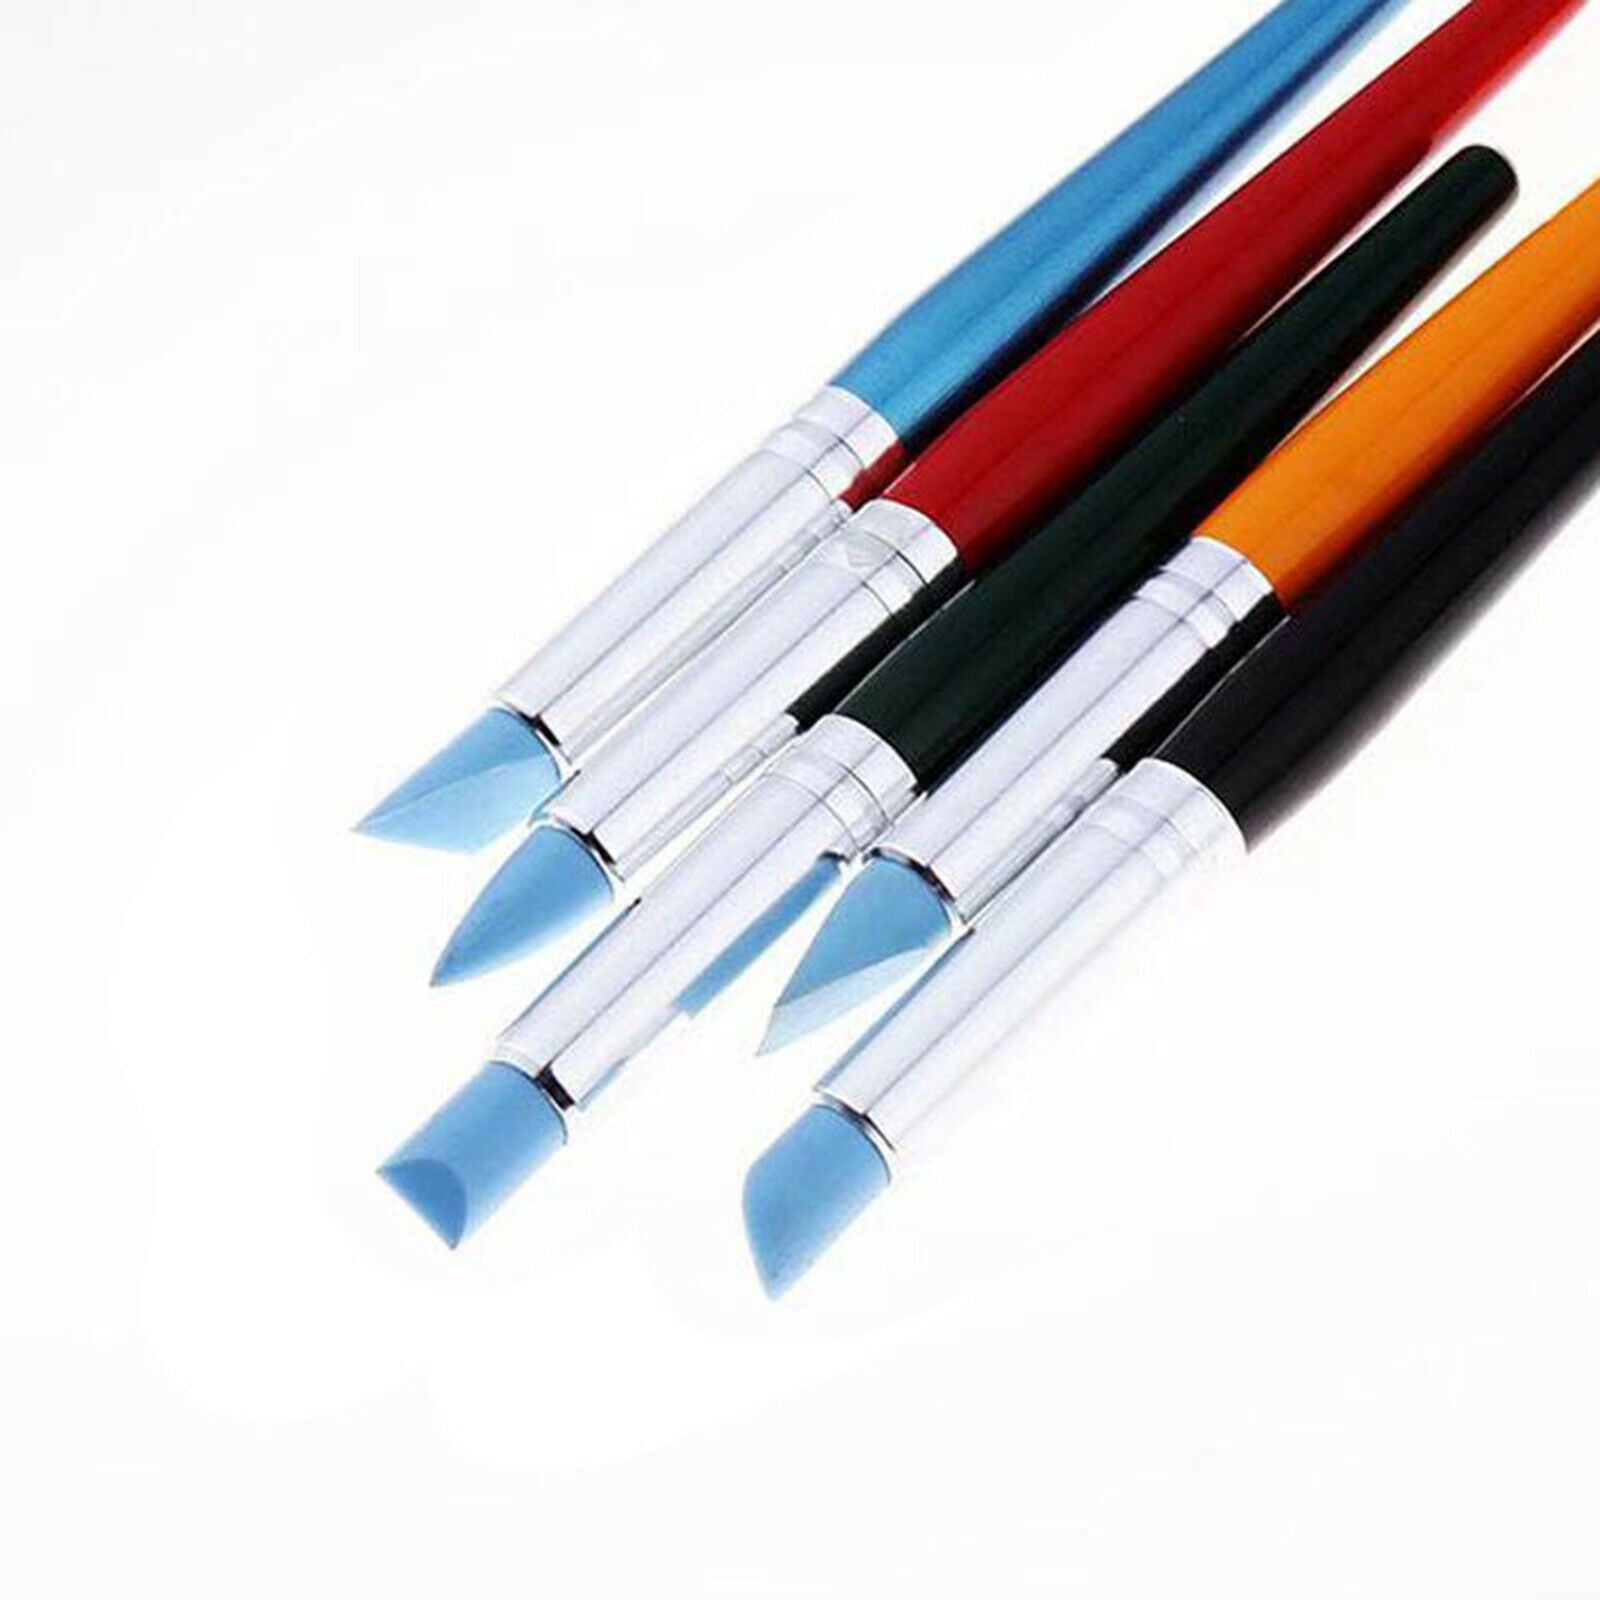 Clay Sculpting Shapers Tool Brushes Sculpture Pottery Shaping Carving Tools